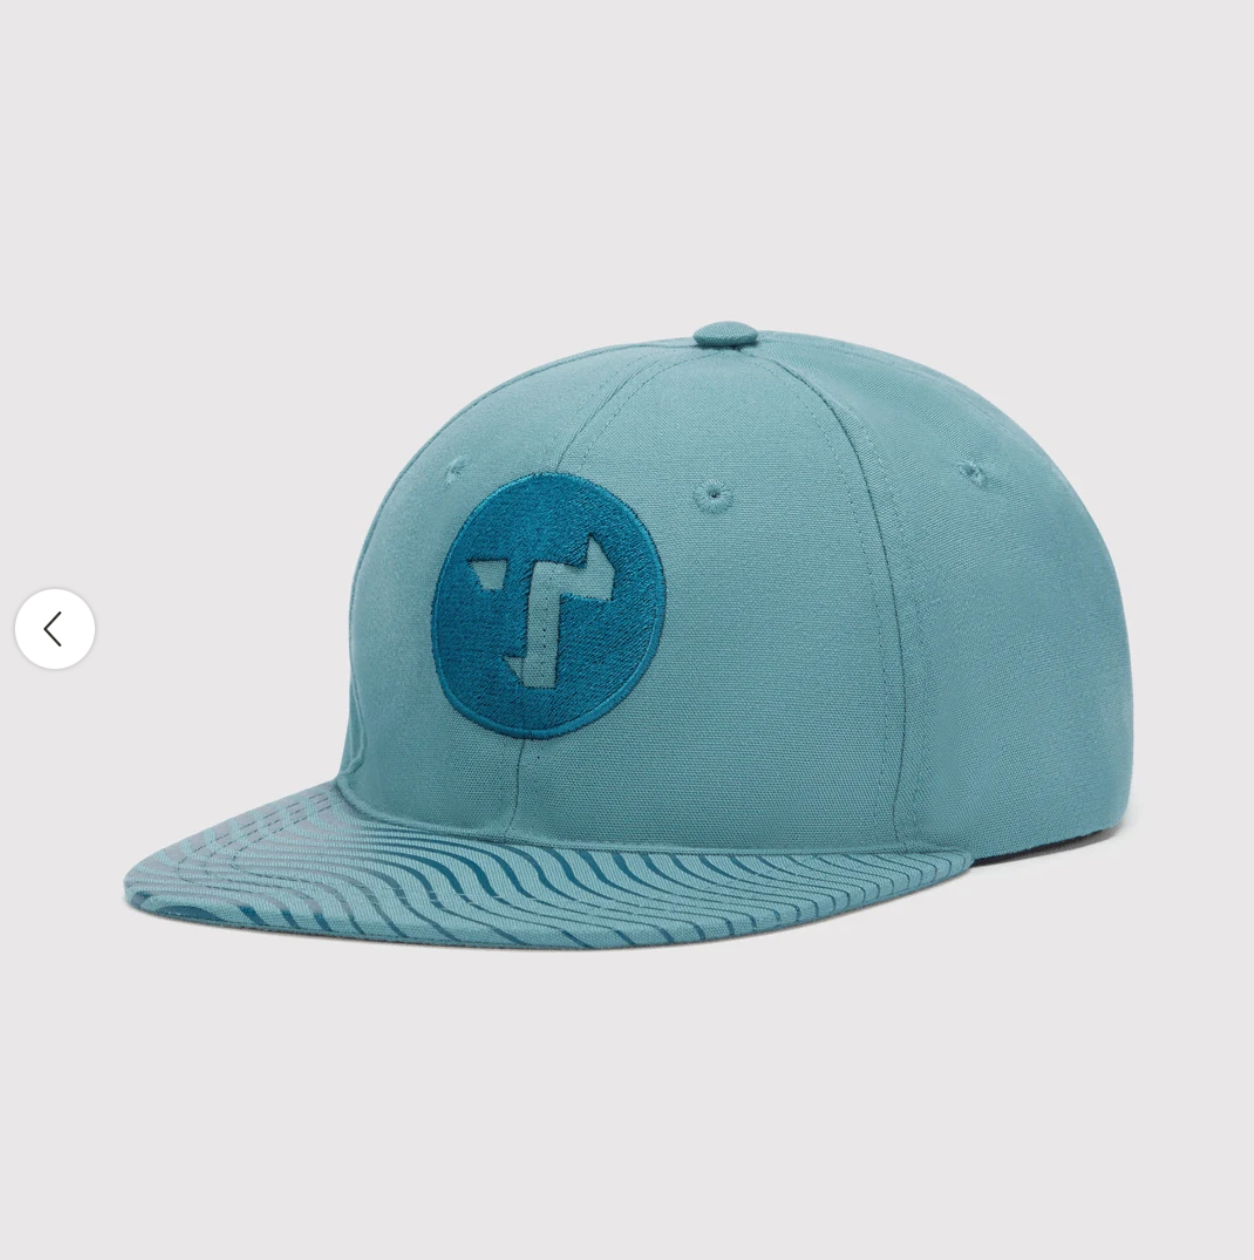 Oceantee 100% Recycled Caps  - Flat Brim - 3 Colours Available